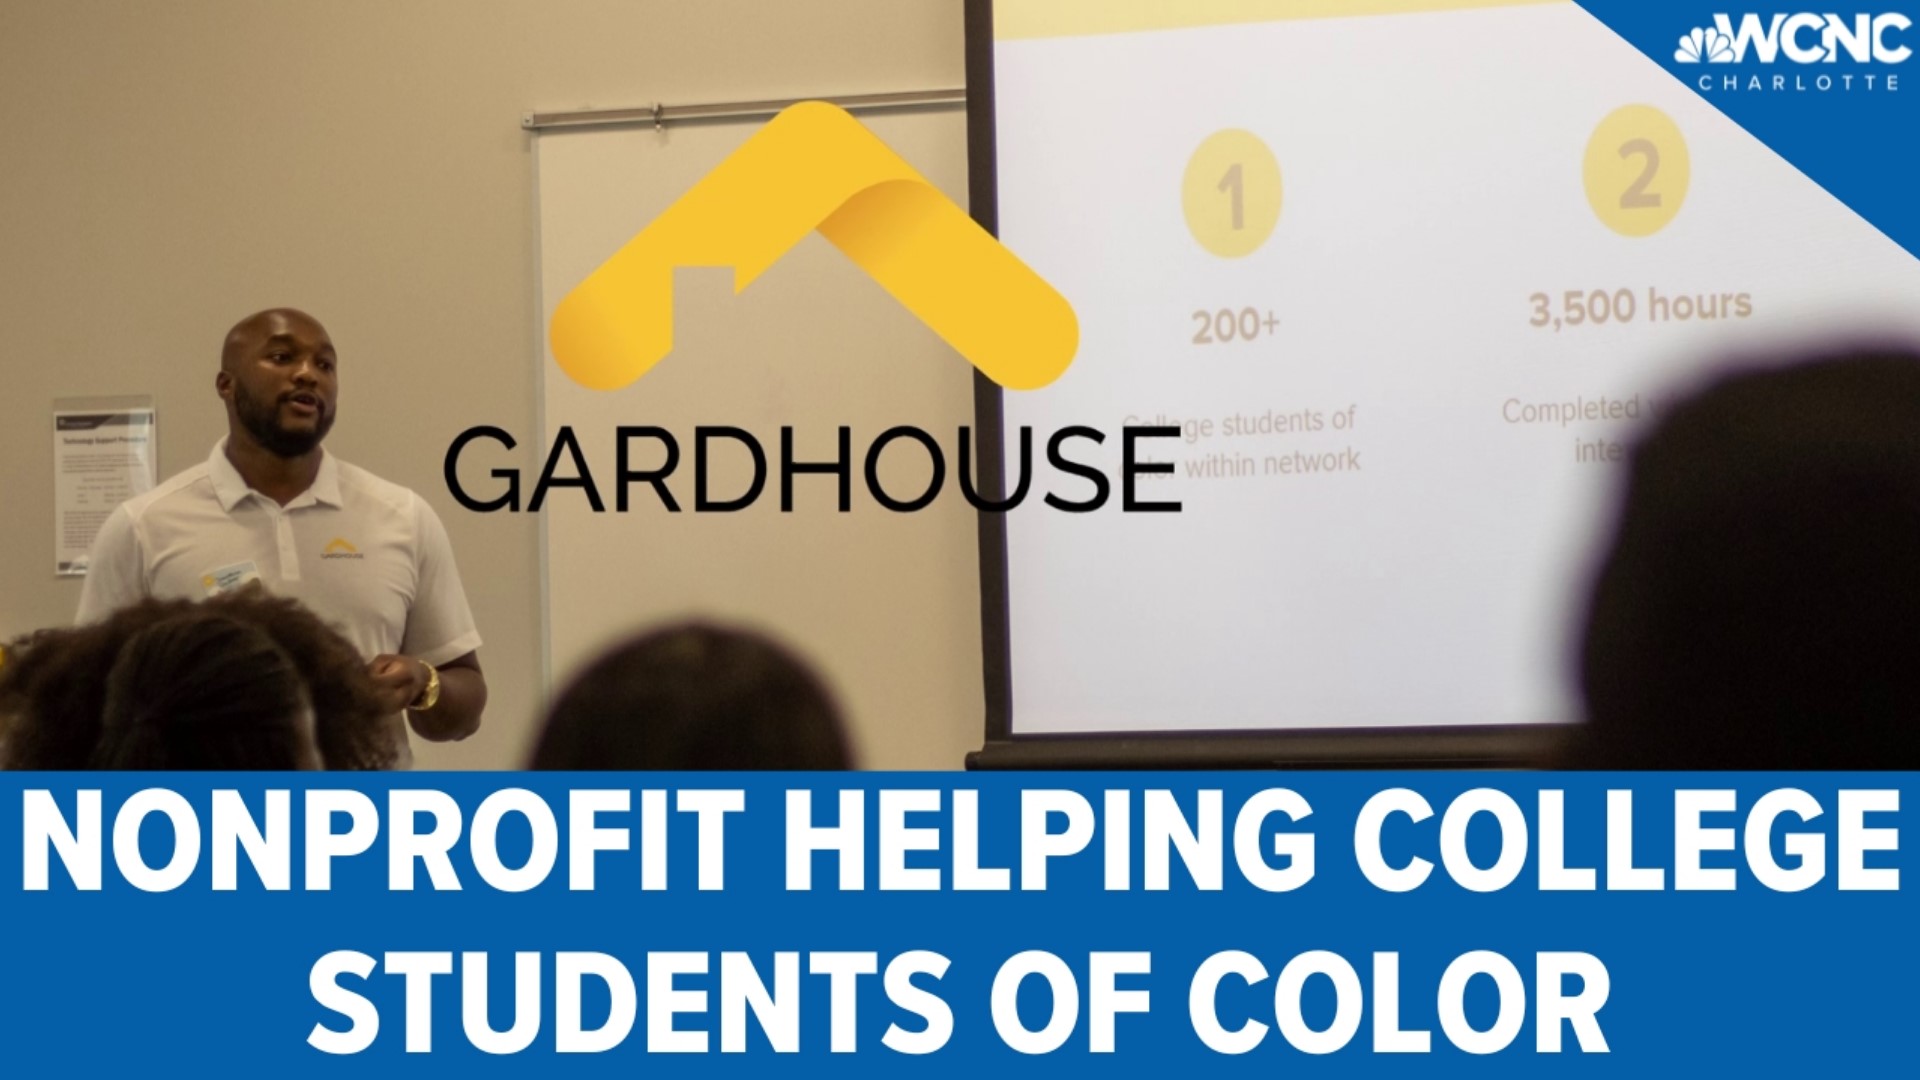 Nearly a week until Giving Tuesday and Charlotte nonprofits like GardHouse are encouraging donations to help college students of color get set for success.